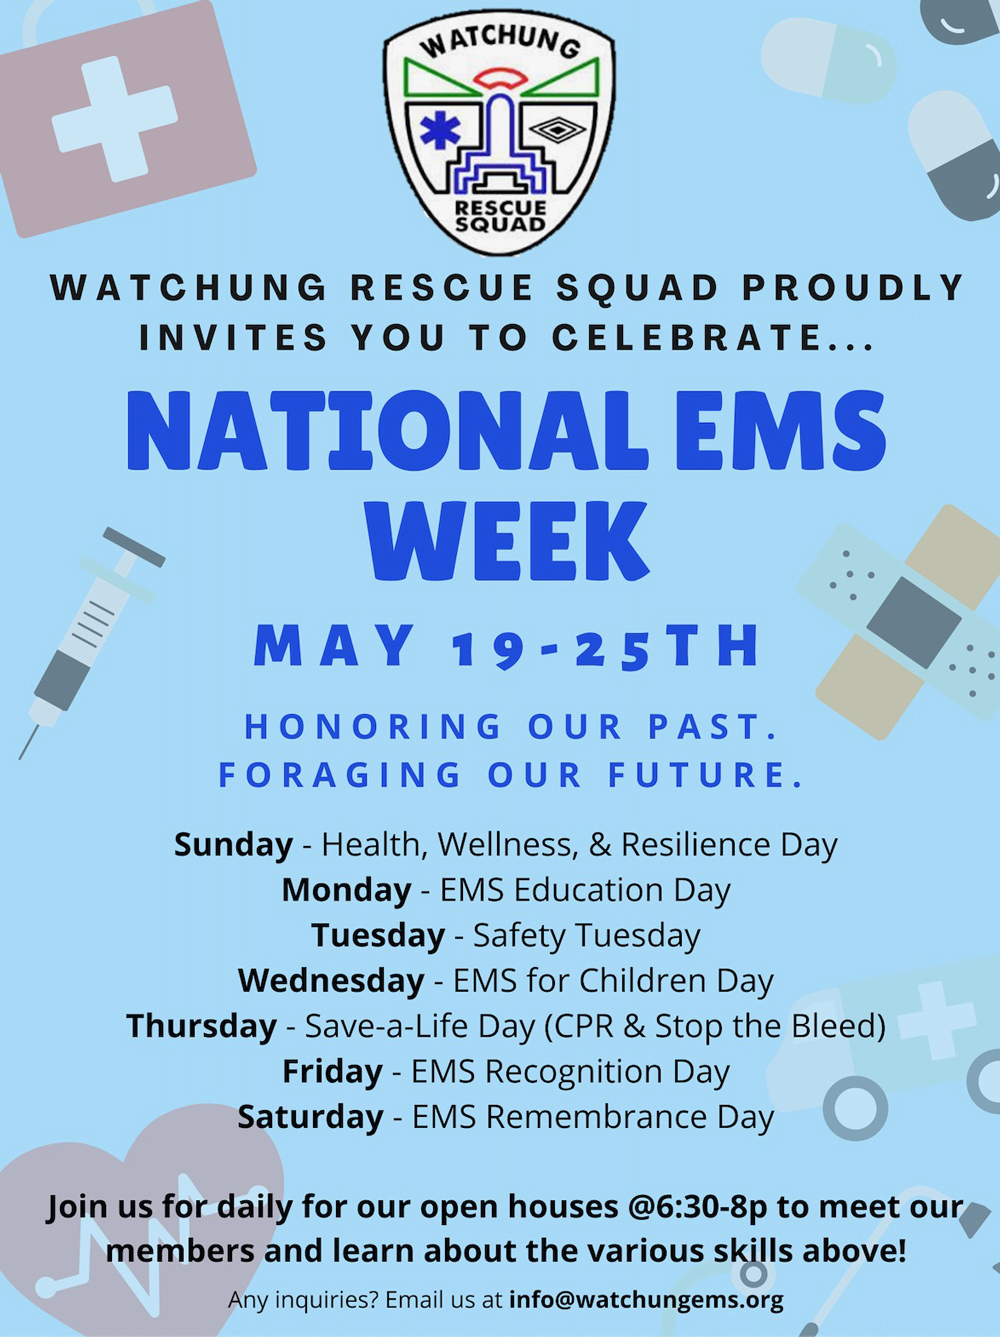 National EMS Week Flyer.  Clicking this image will open an OCR scanned PDF version of this flyer.